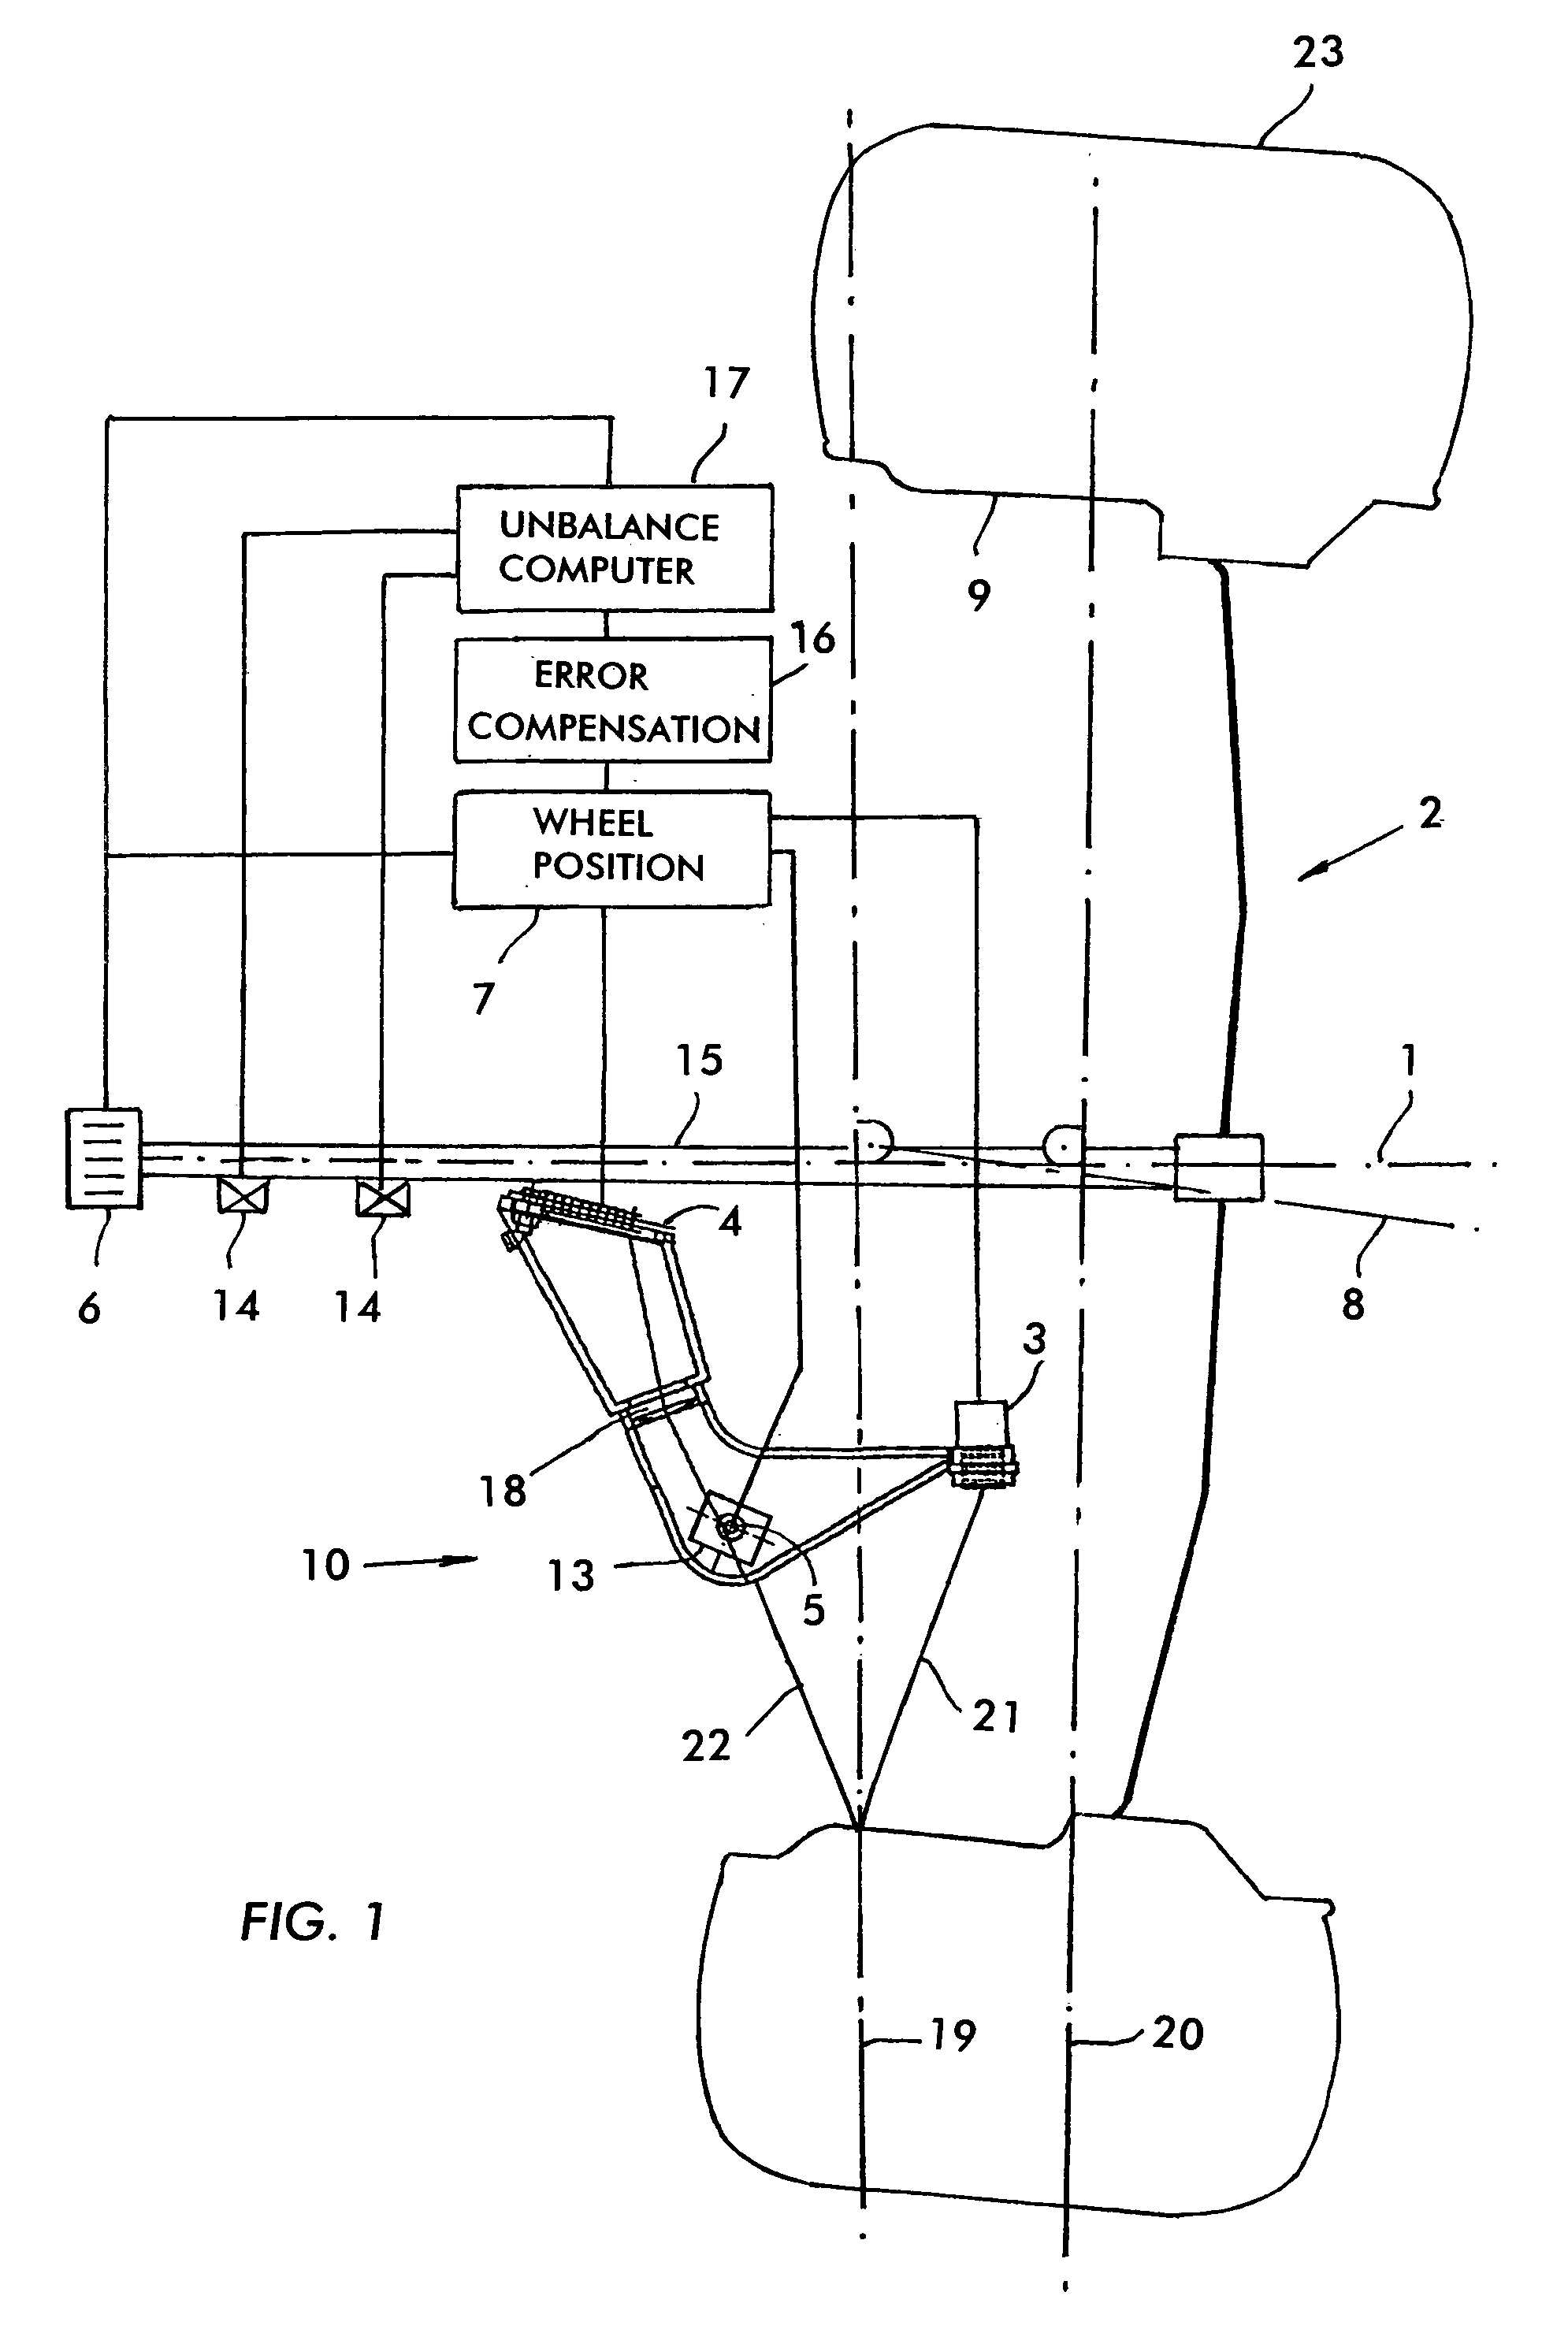 Method and apparatus for determining geometrical data of a motor vehicle wheel mounted rotatably about an axis of rotation